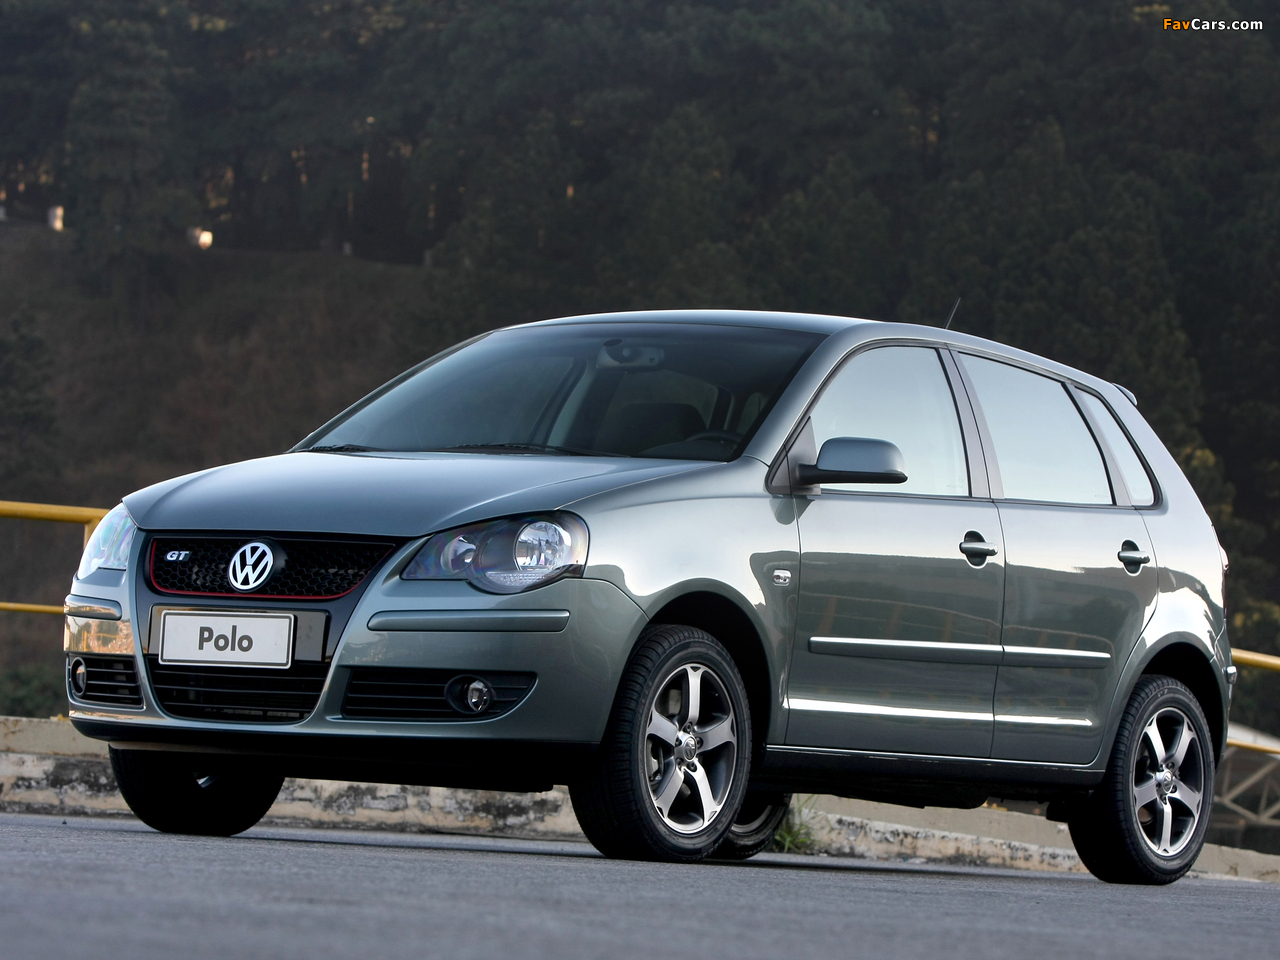 Volkswagen Polo GT (Typ 9N3) 2008 pictures (1280 x 960)